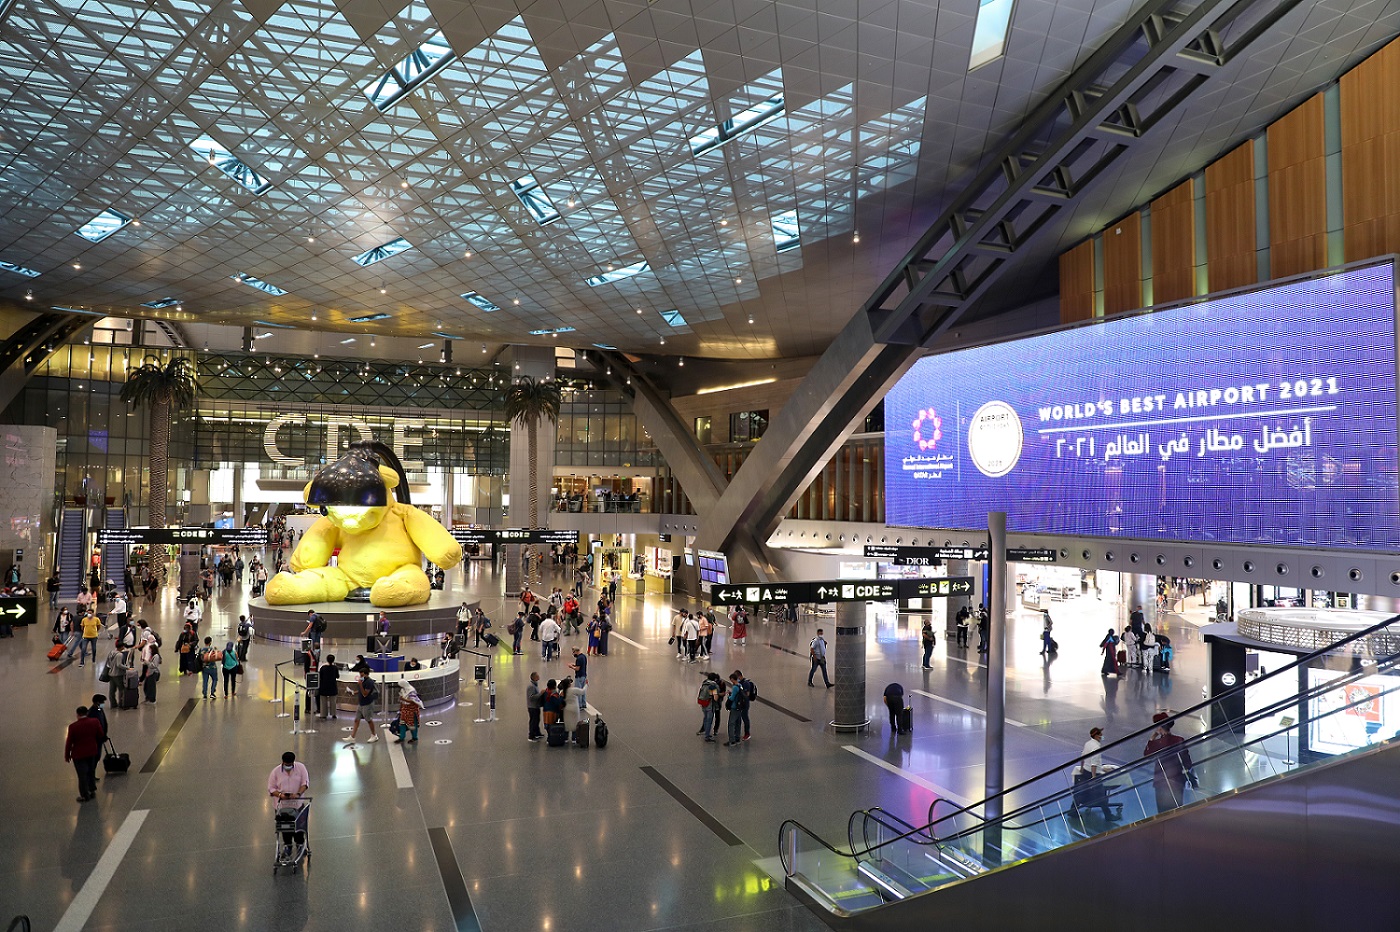 Hamad International Airport (HIA) in Qatar has won the title of ‘Best Airport in the World’ at the Skytrax World Airport Awards 2021 Click to enlarge.